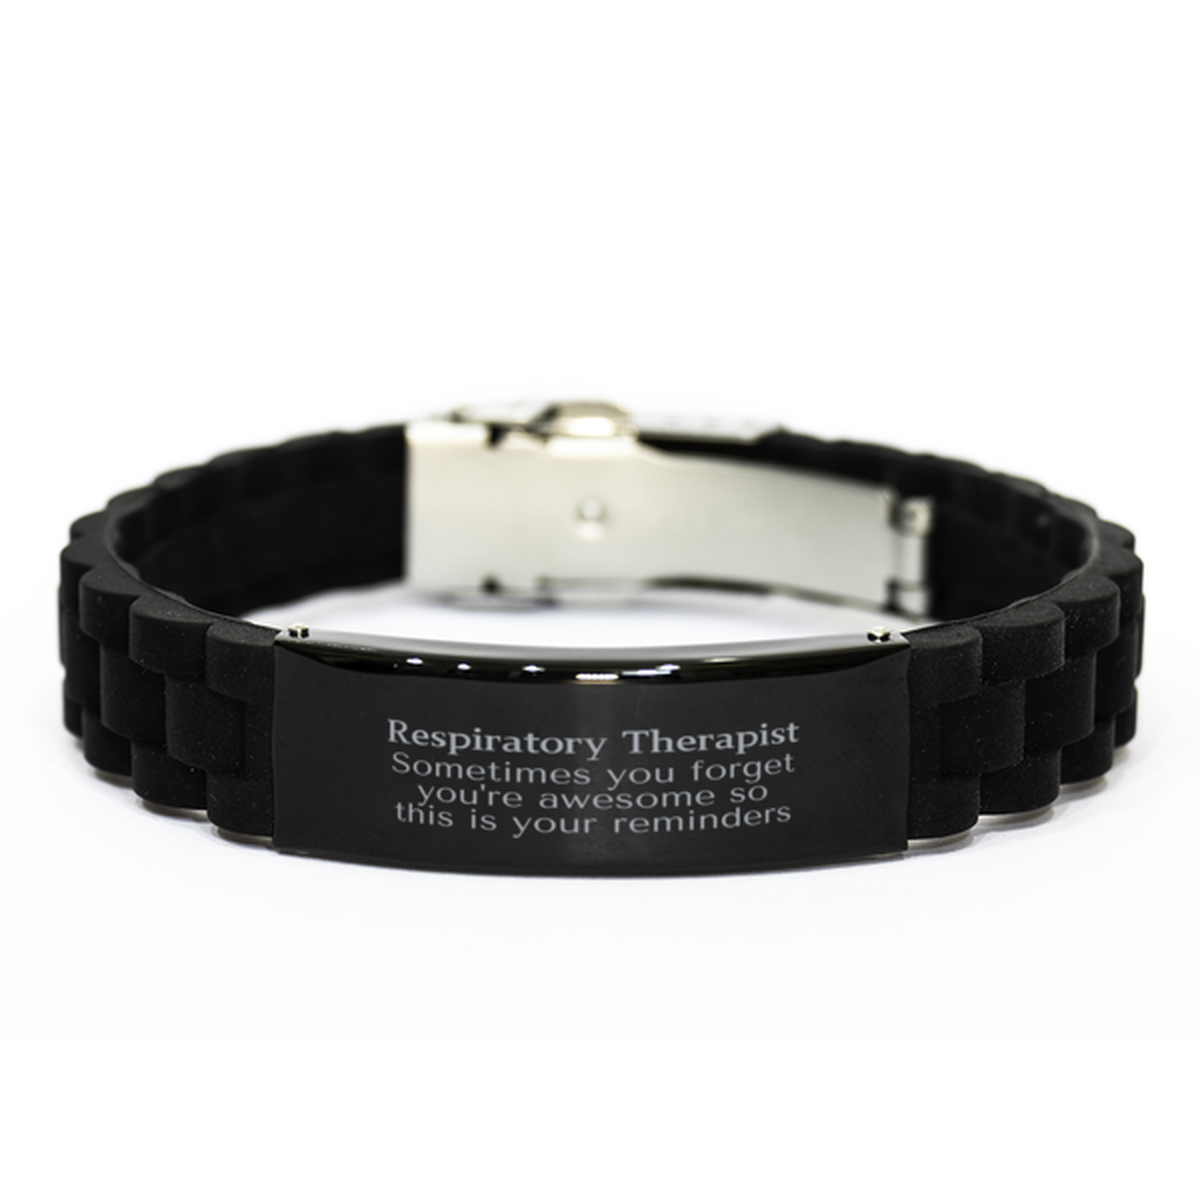 Sentimental Respiratory Therapist Black Glidelock Clasp Bracelet, Respiratory Therapist Sometimes you forget you're awesome so this is your reminders, Graduation Christmas Birthday Gifts for Respiratory Therapist, Men, Women, Coworkers